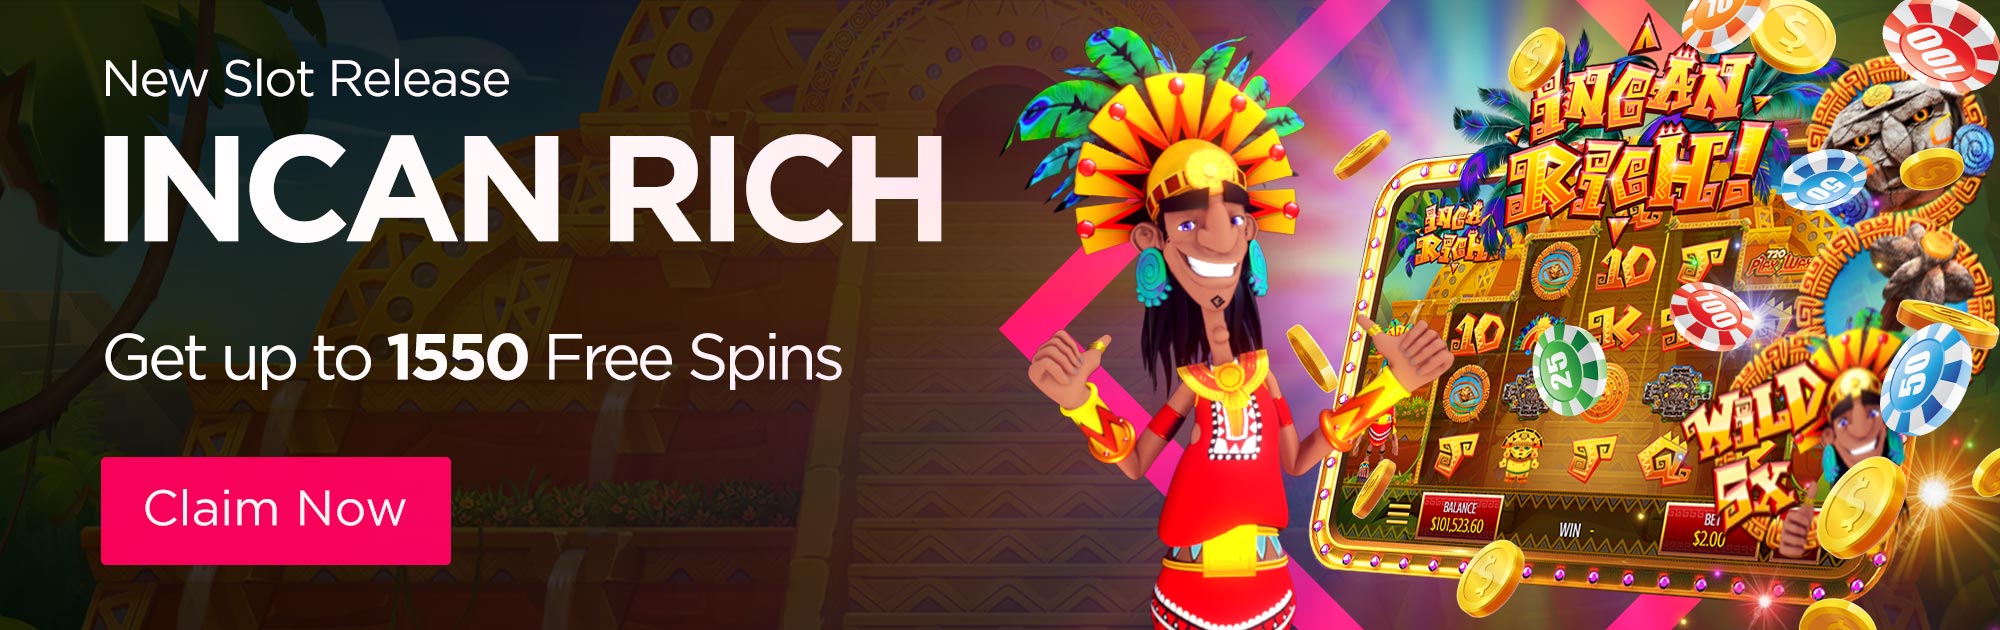 New Game Release: Incan Rich